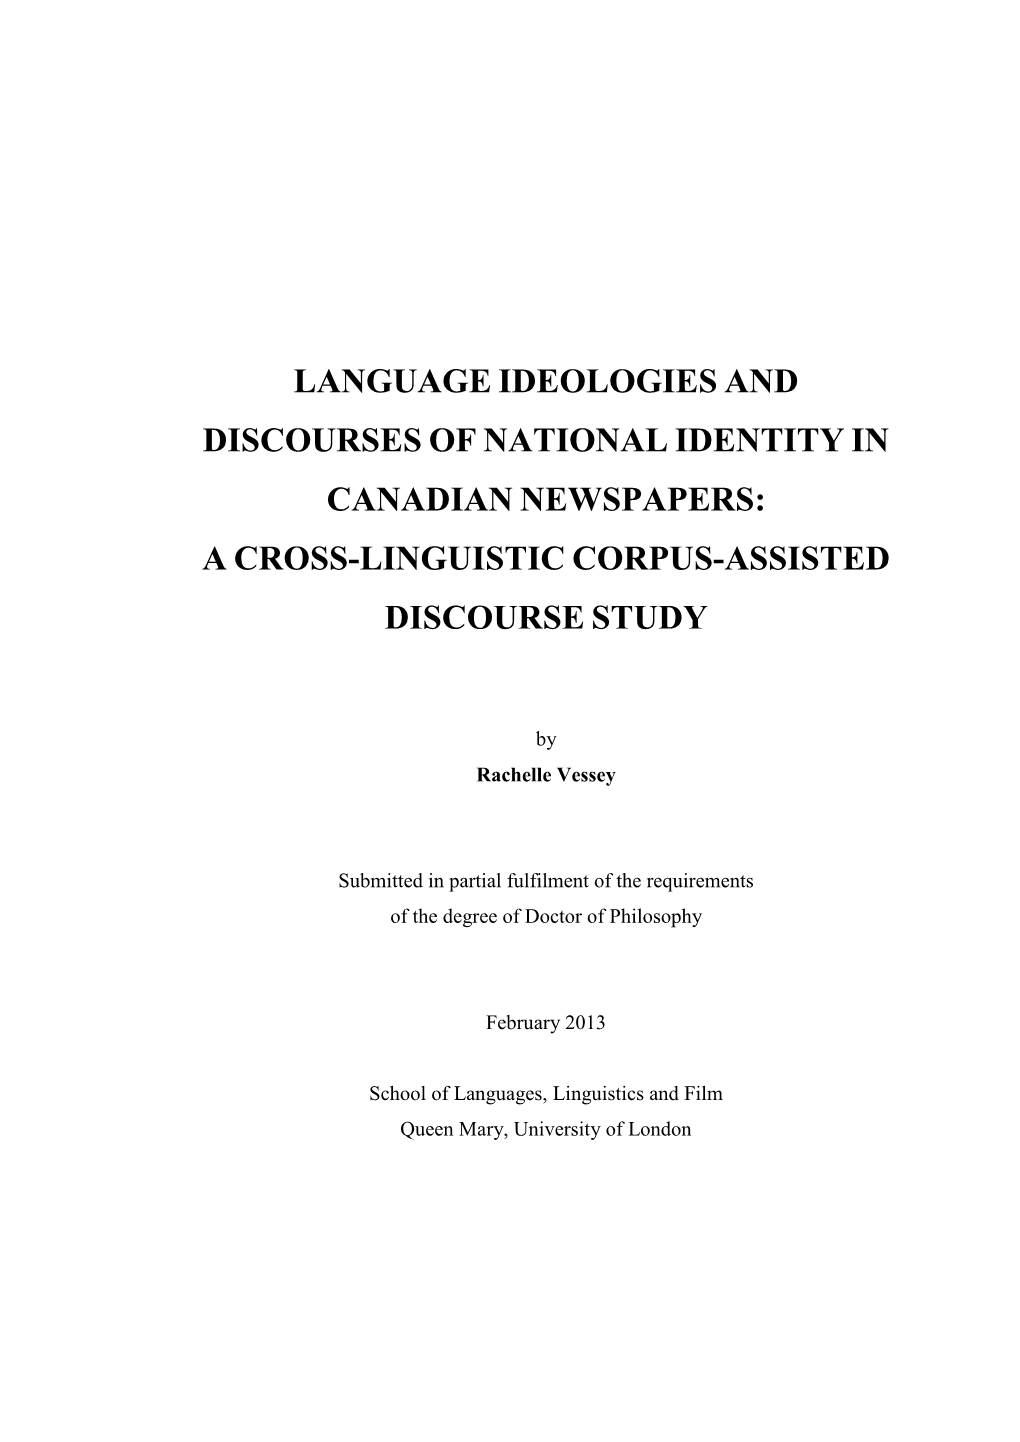 Language Ideologies and Discourses of National Identity in Canadian Newspapers